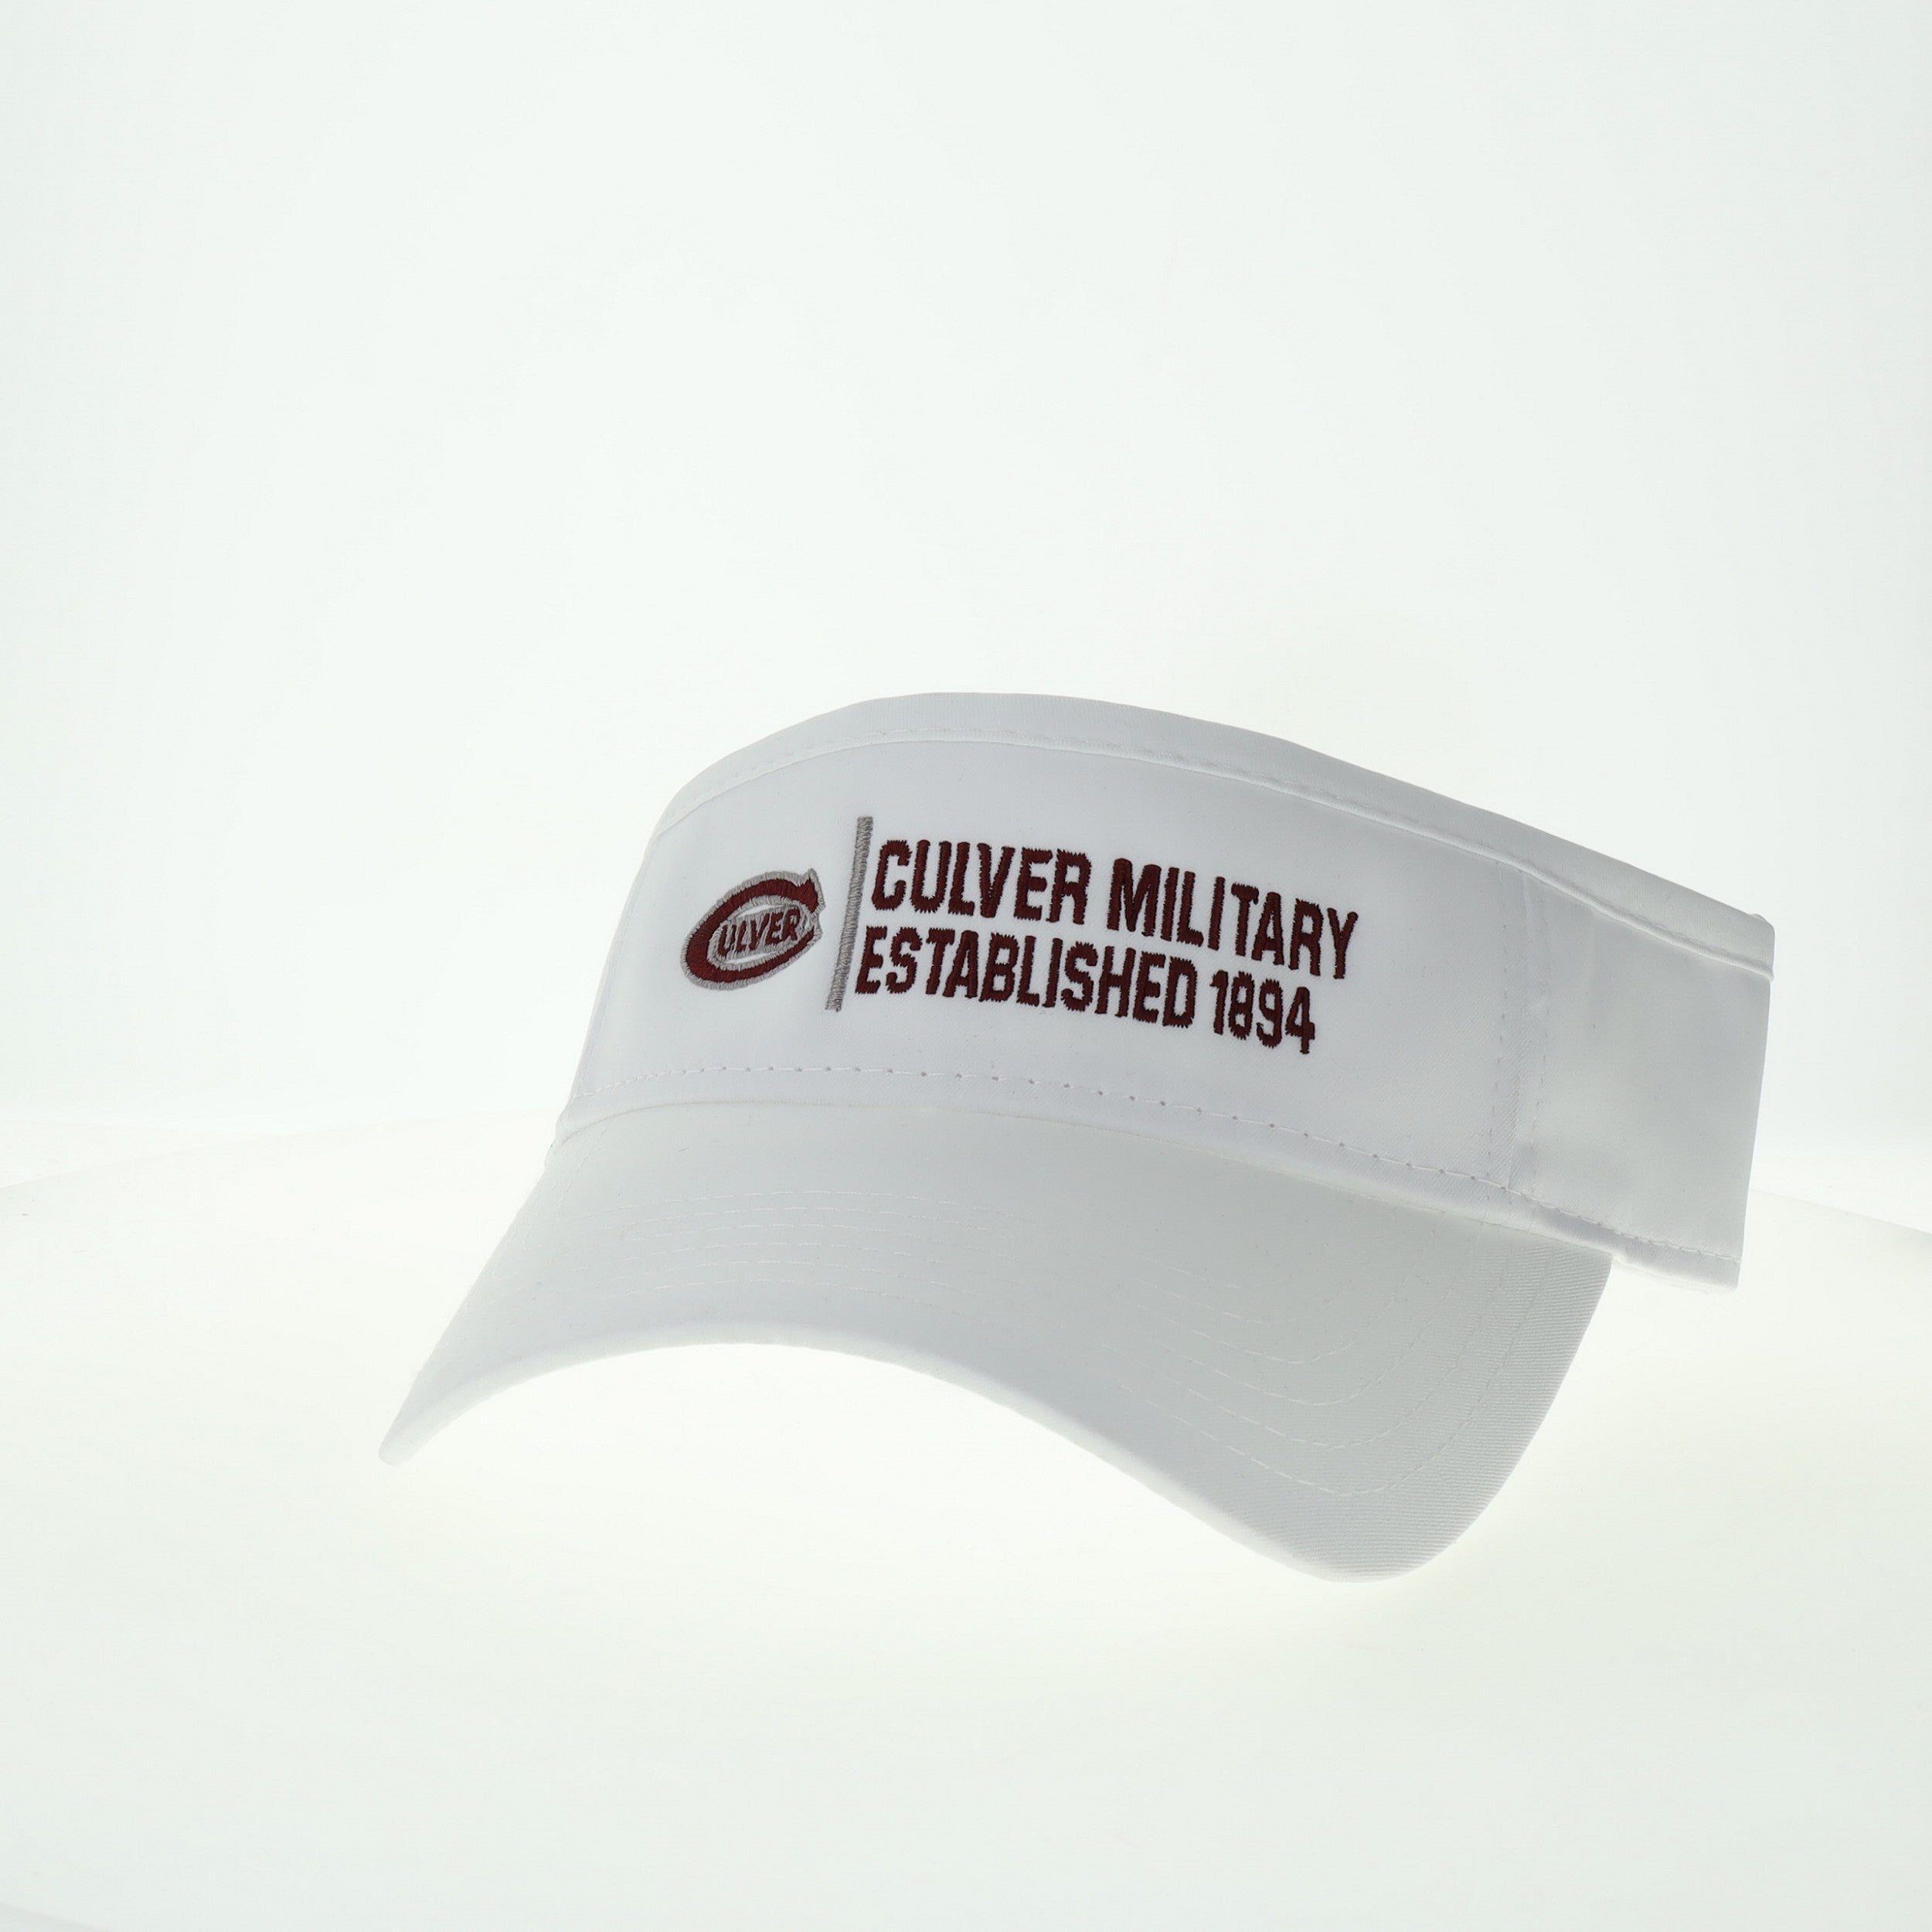 Cool Fit Visor - White Silver/Maroon Culver Military